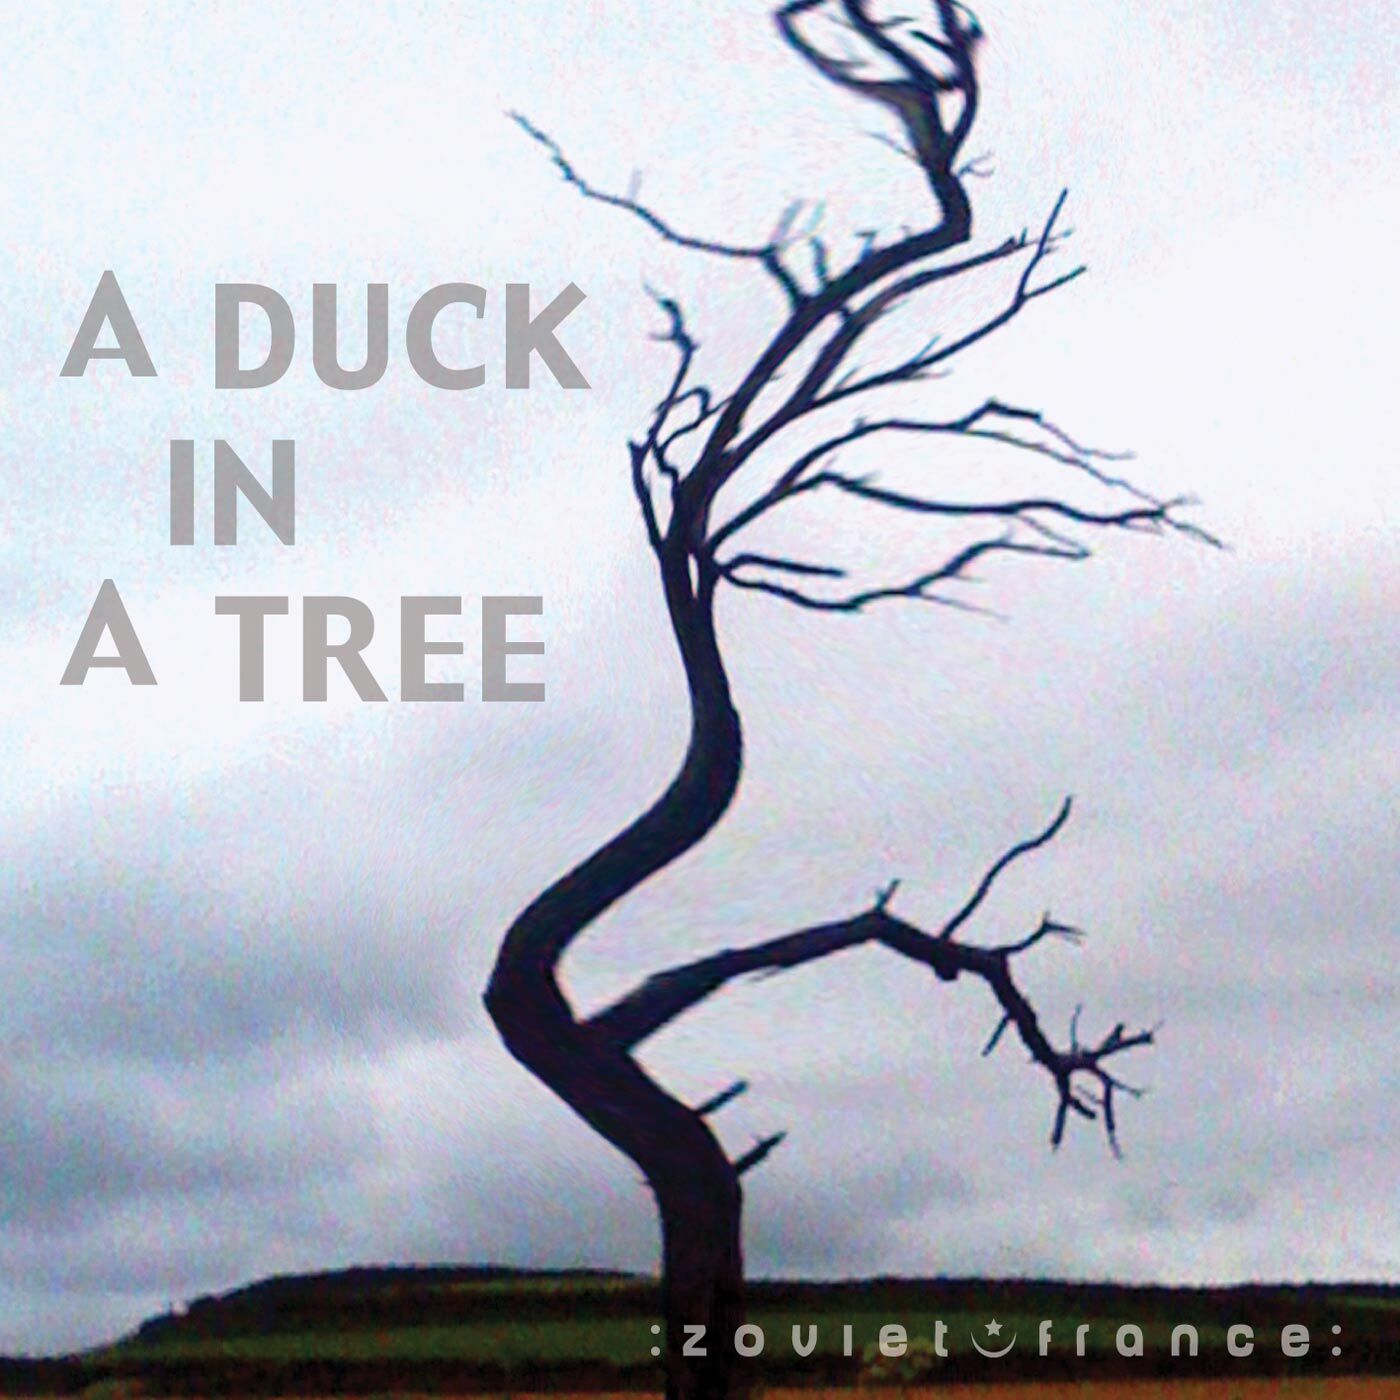 A-Duck-in-a-Tree-2013-03-23-_-Soluble-in-Granite-layout-1400.jpg